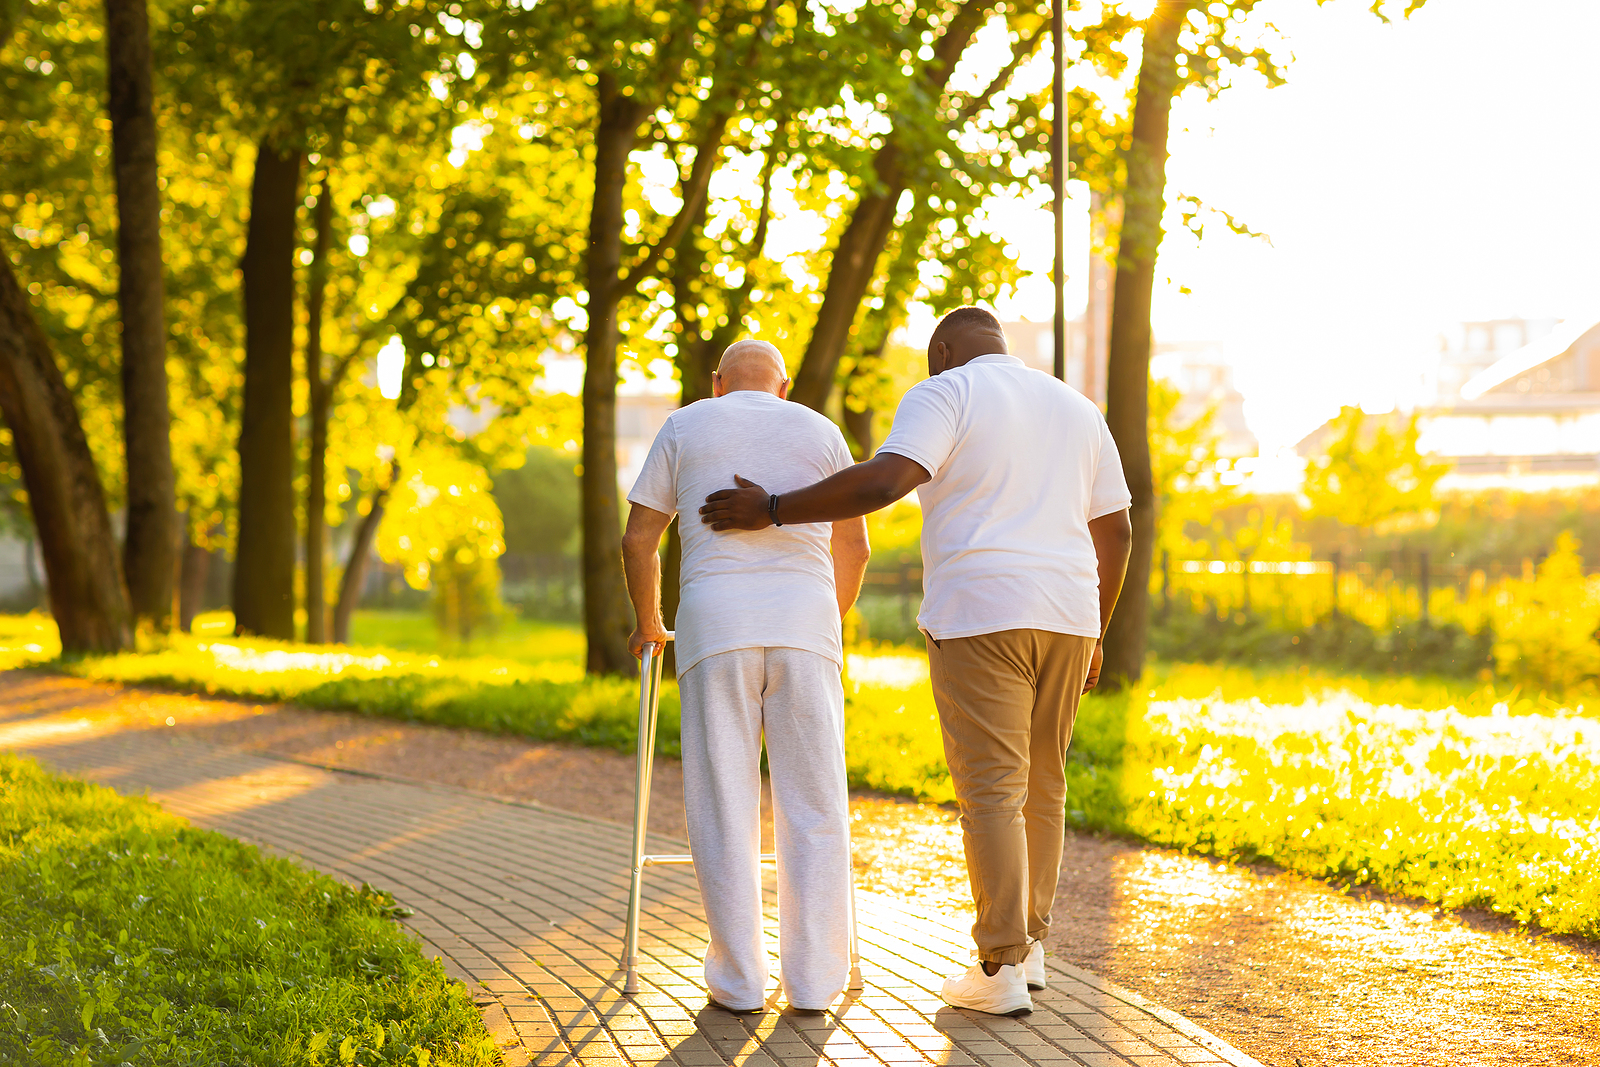 Companion Care at Home in St. Charles, IL